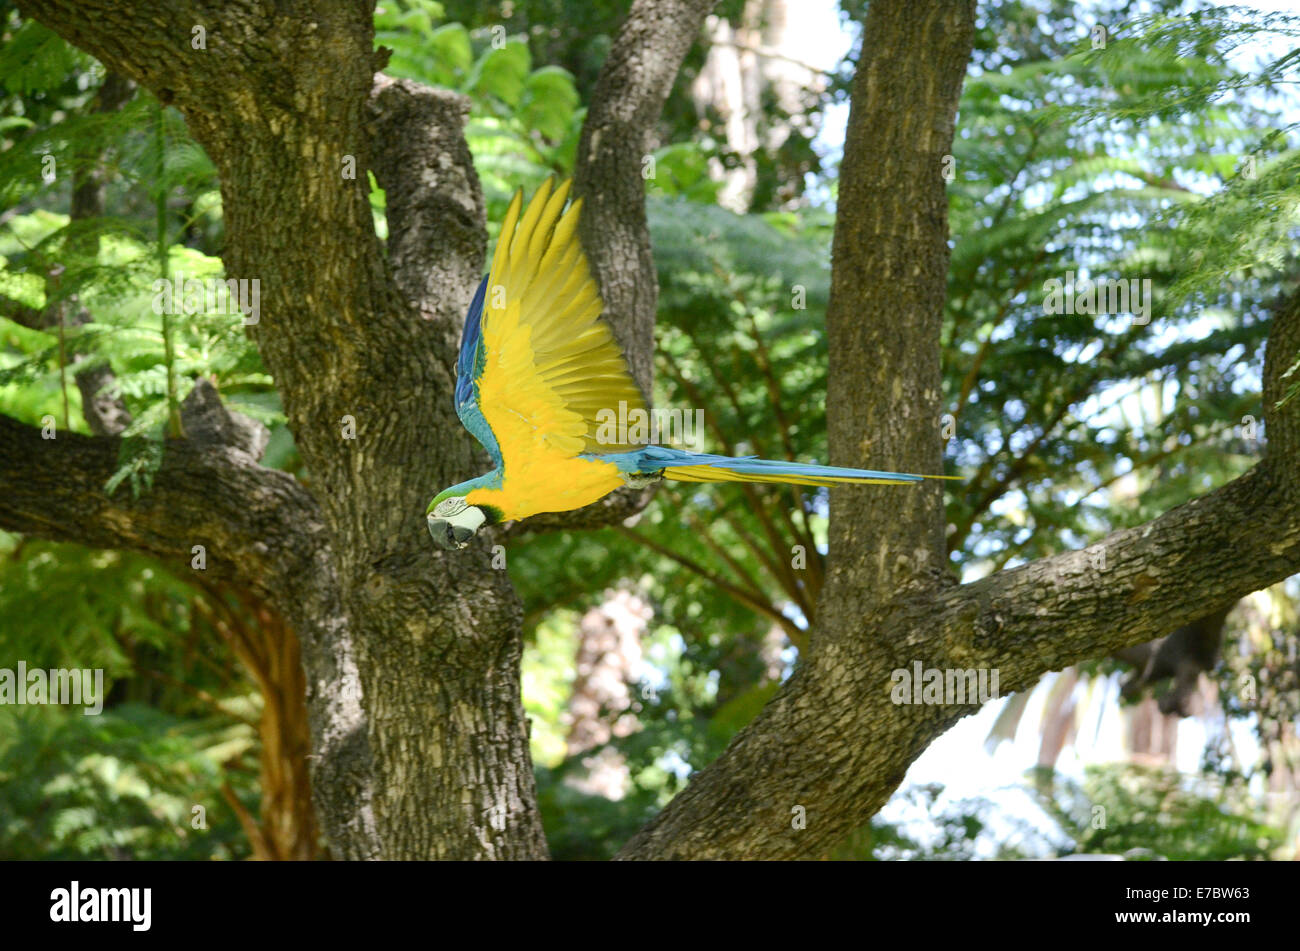 Blue and Yellow Macaw flying through foliage Stock Photo